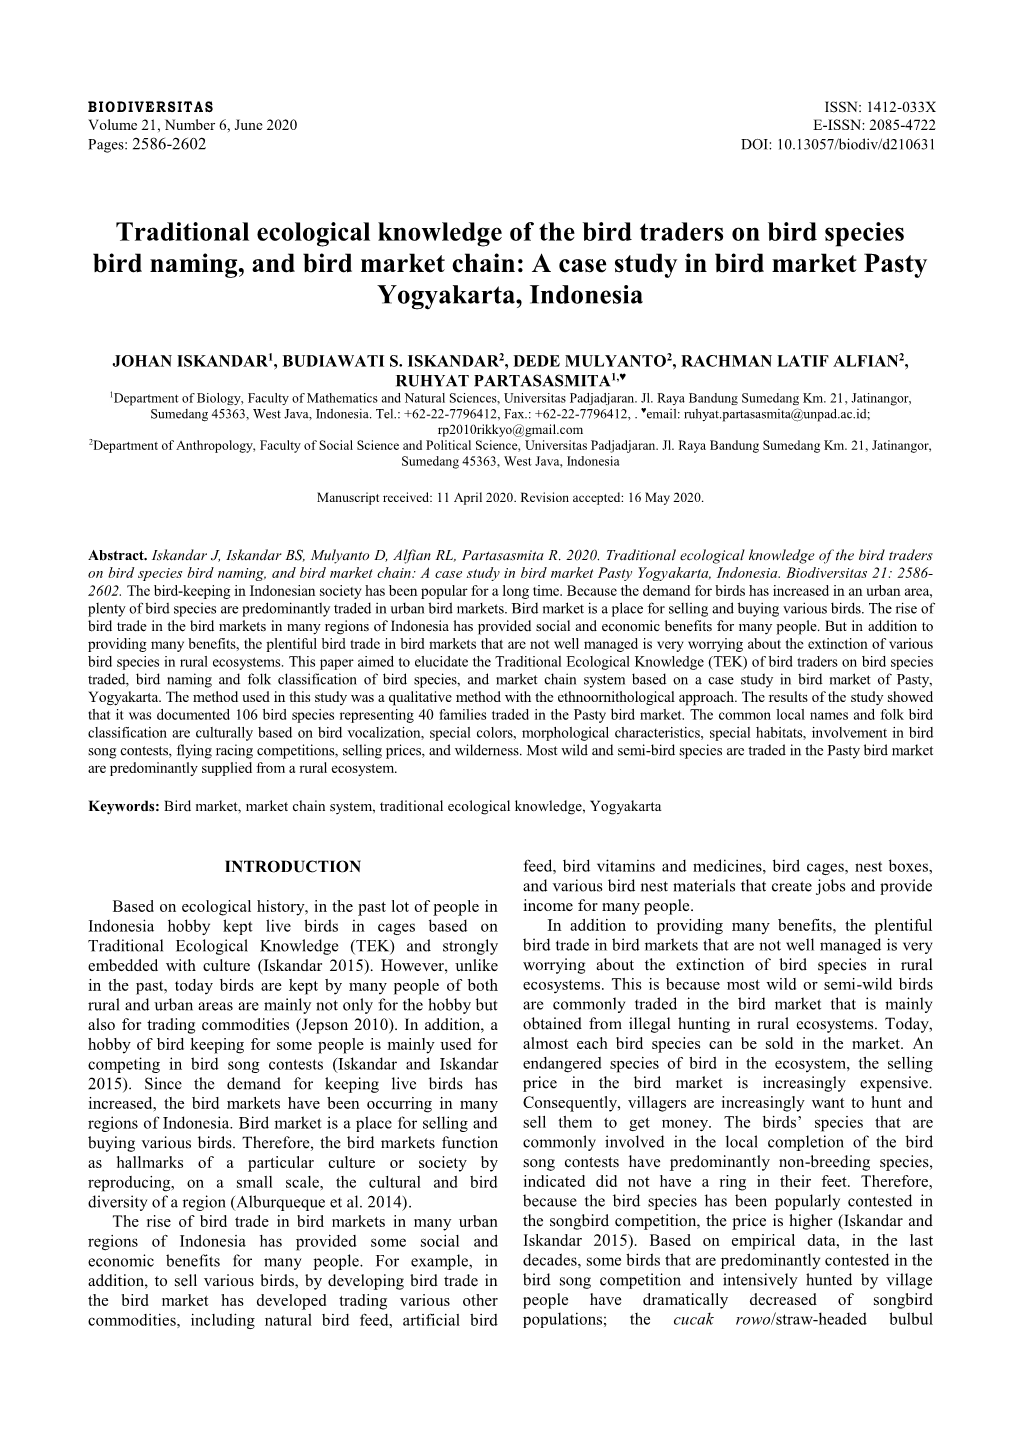 Traditional Ecological Knowledge of the Bird Traders on Bird Species Bird Naming, and Bird Market Chain: a Case Study in Bird Market Pasty Yogyakarta, Indonesia